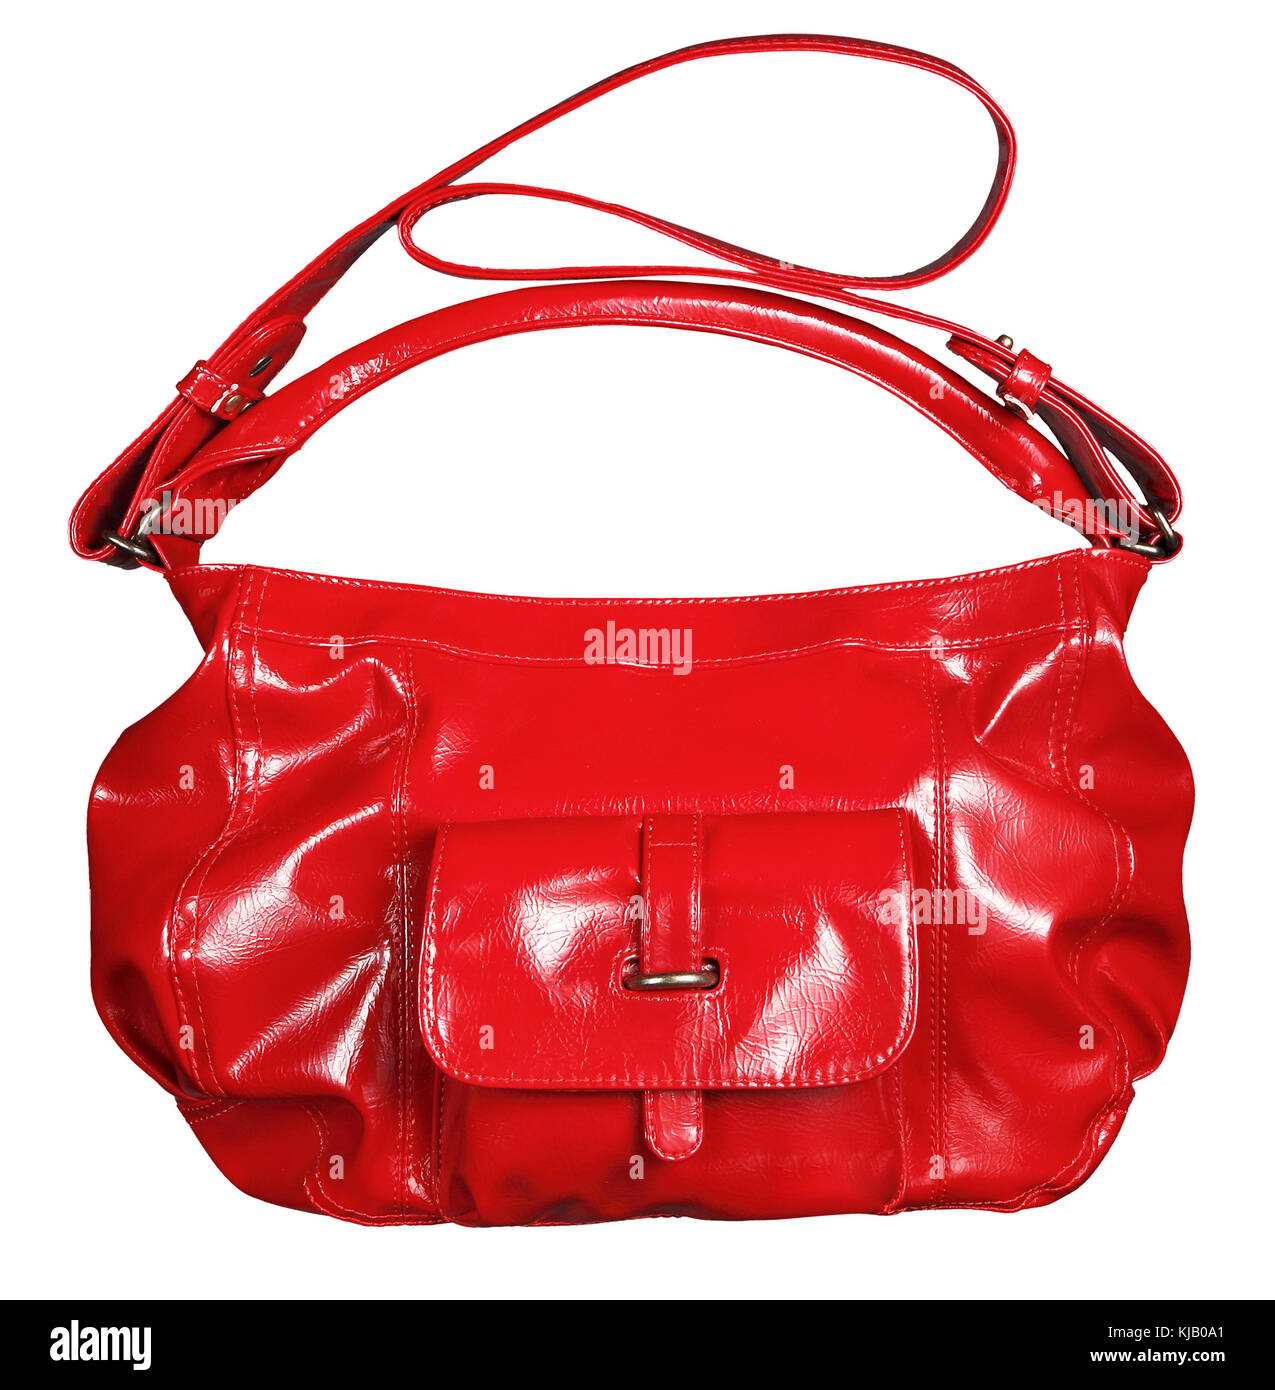 Bright red shiny patent leather handbag with dual carry and shoulder straps for an elegant female fashion accessory isolated on white Stock Photo